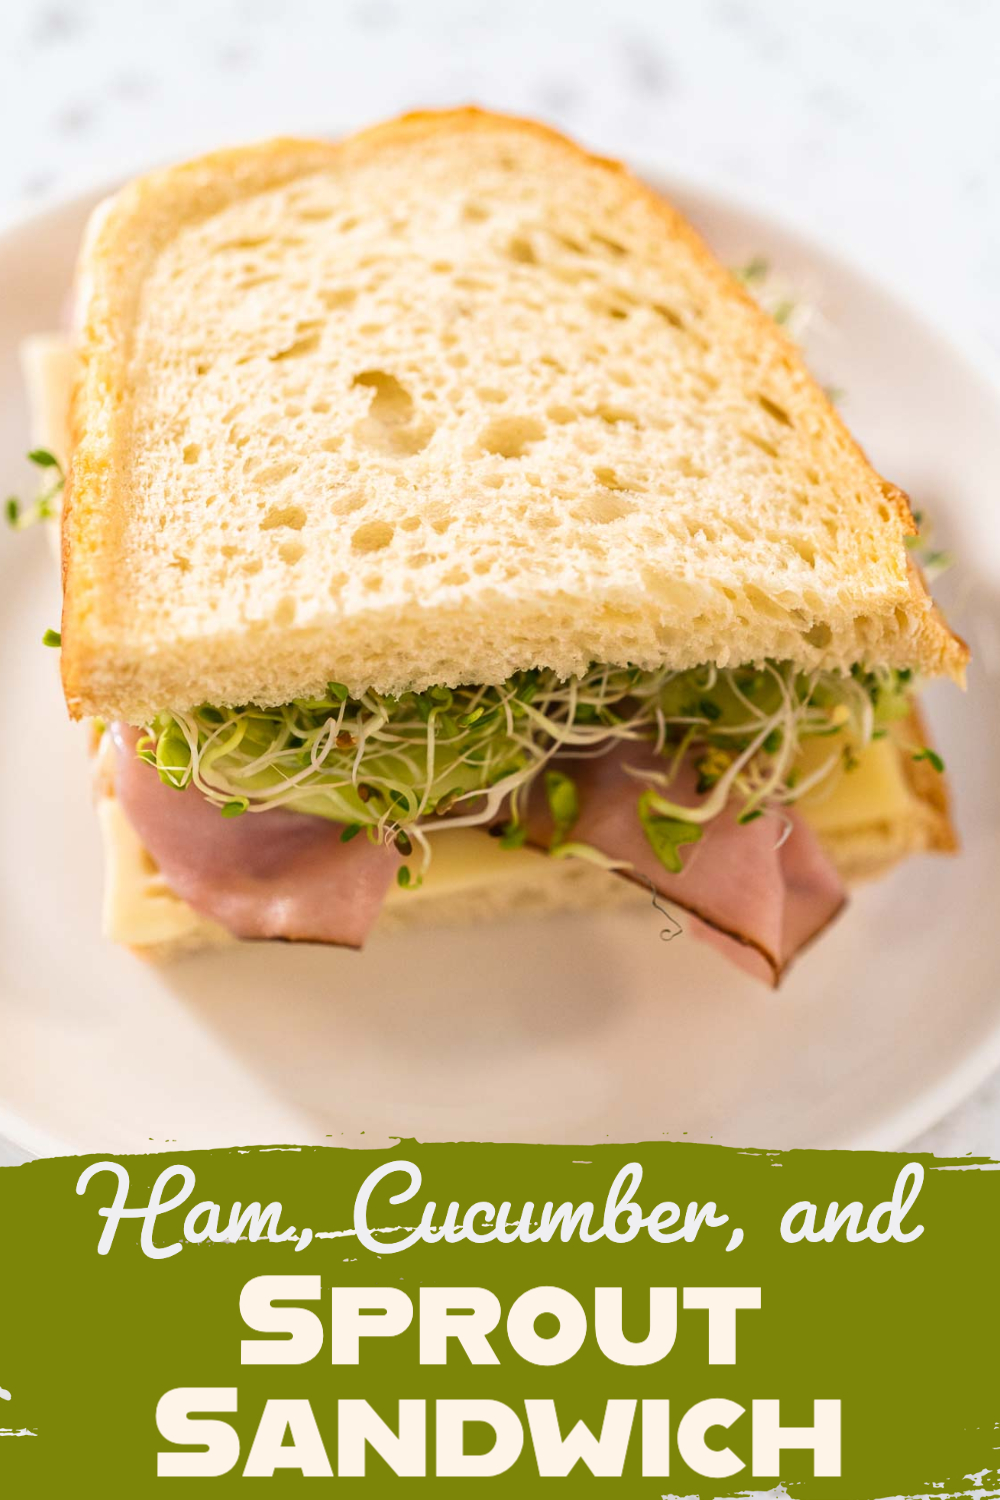 Ham, Cucumber, and Sprout Sandwich